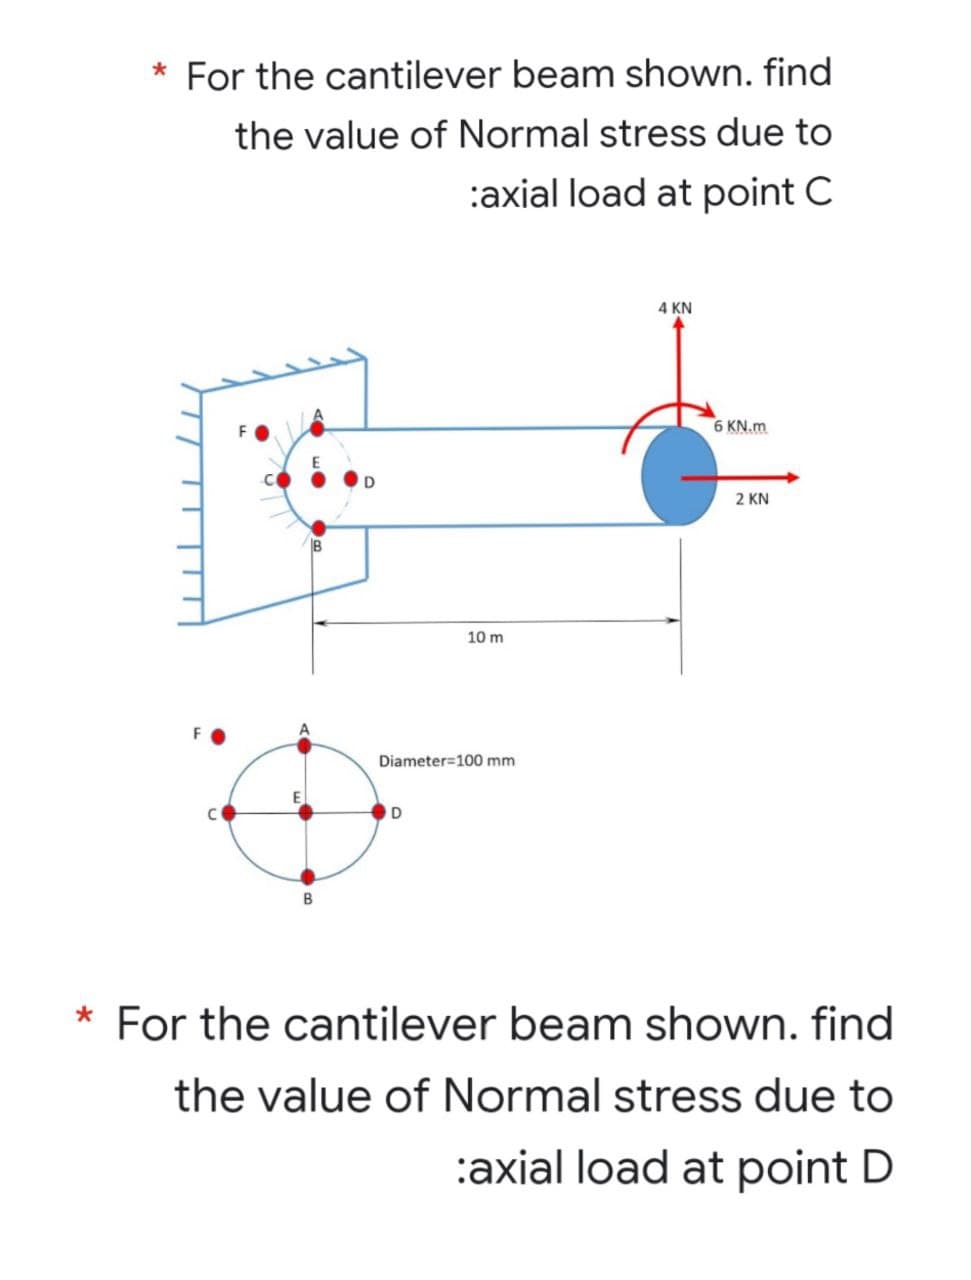 * For the cantilever beam shown. find
the value of Normal stress due to
:axial load at point C
4 KN
6 KN.m
2 KN
B
10 m
Diameter=100 mm
* For the cantilever beam shown. find
the value of Normal stress due to
:axial load at point D
